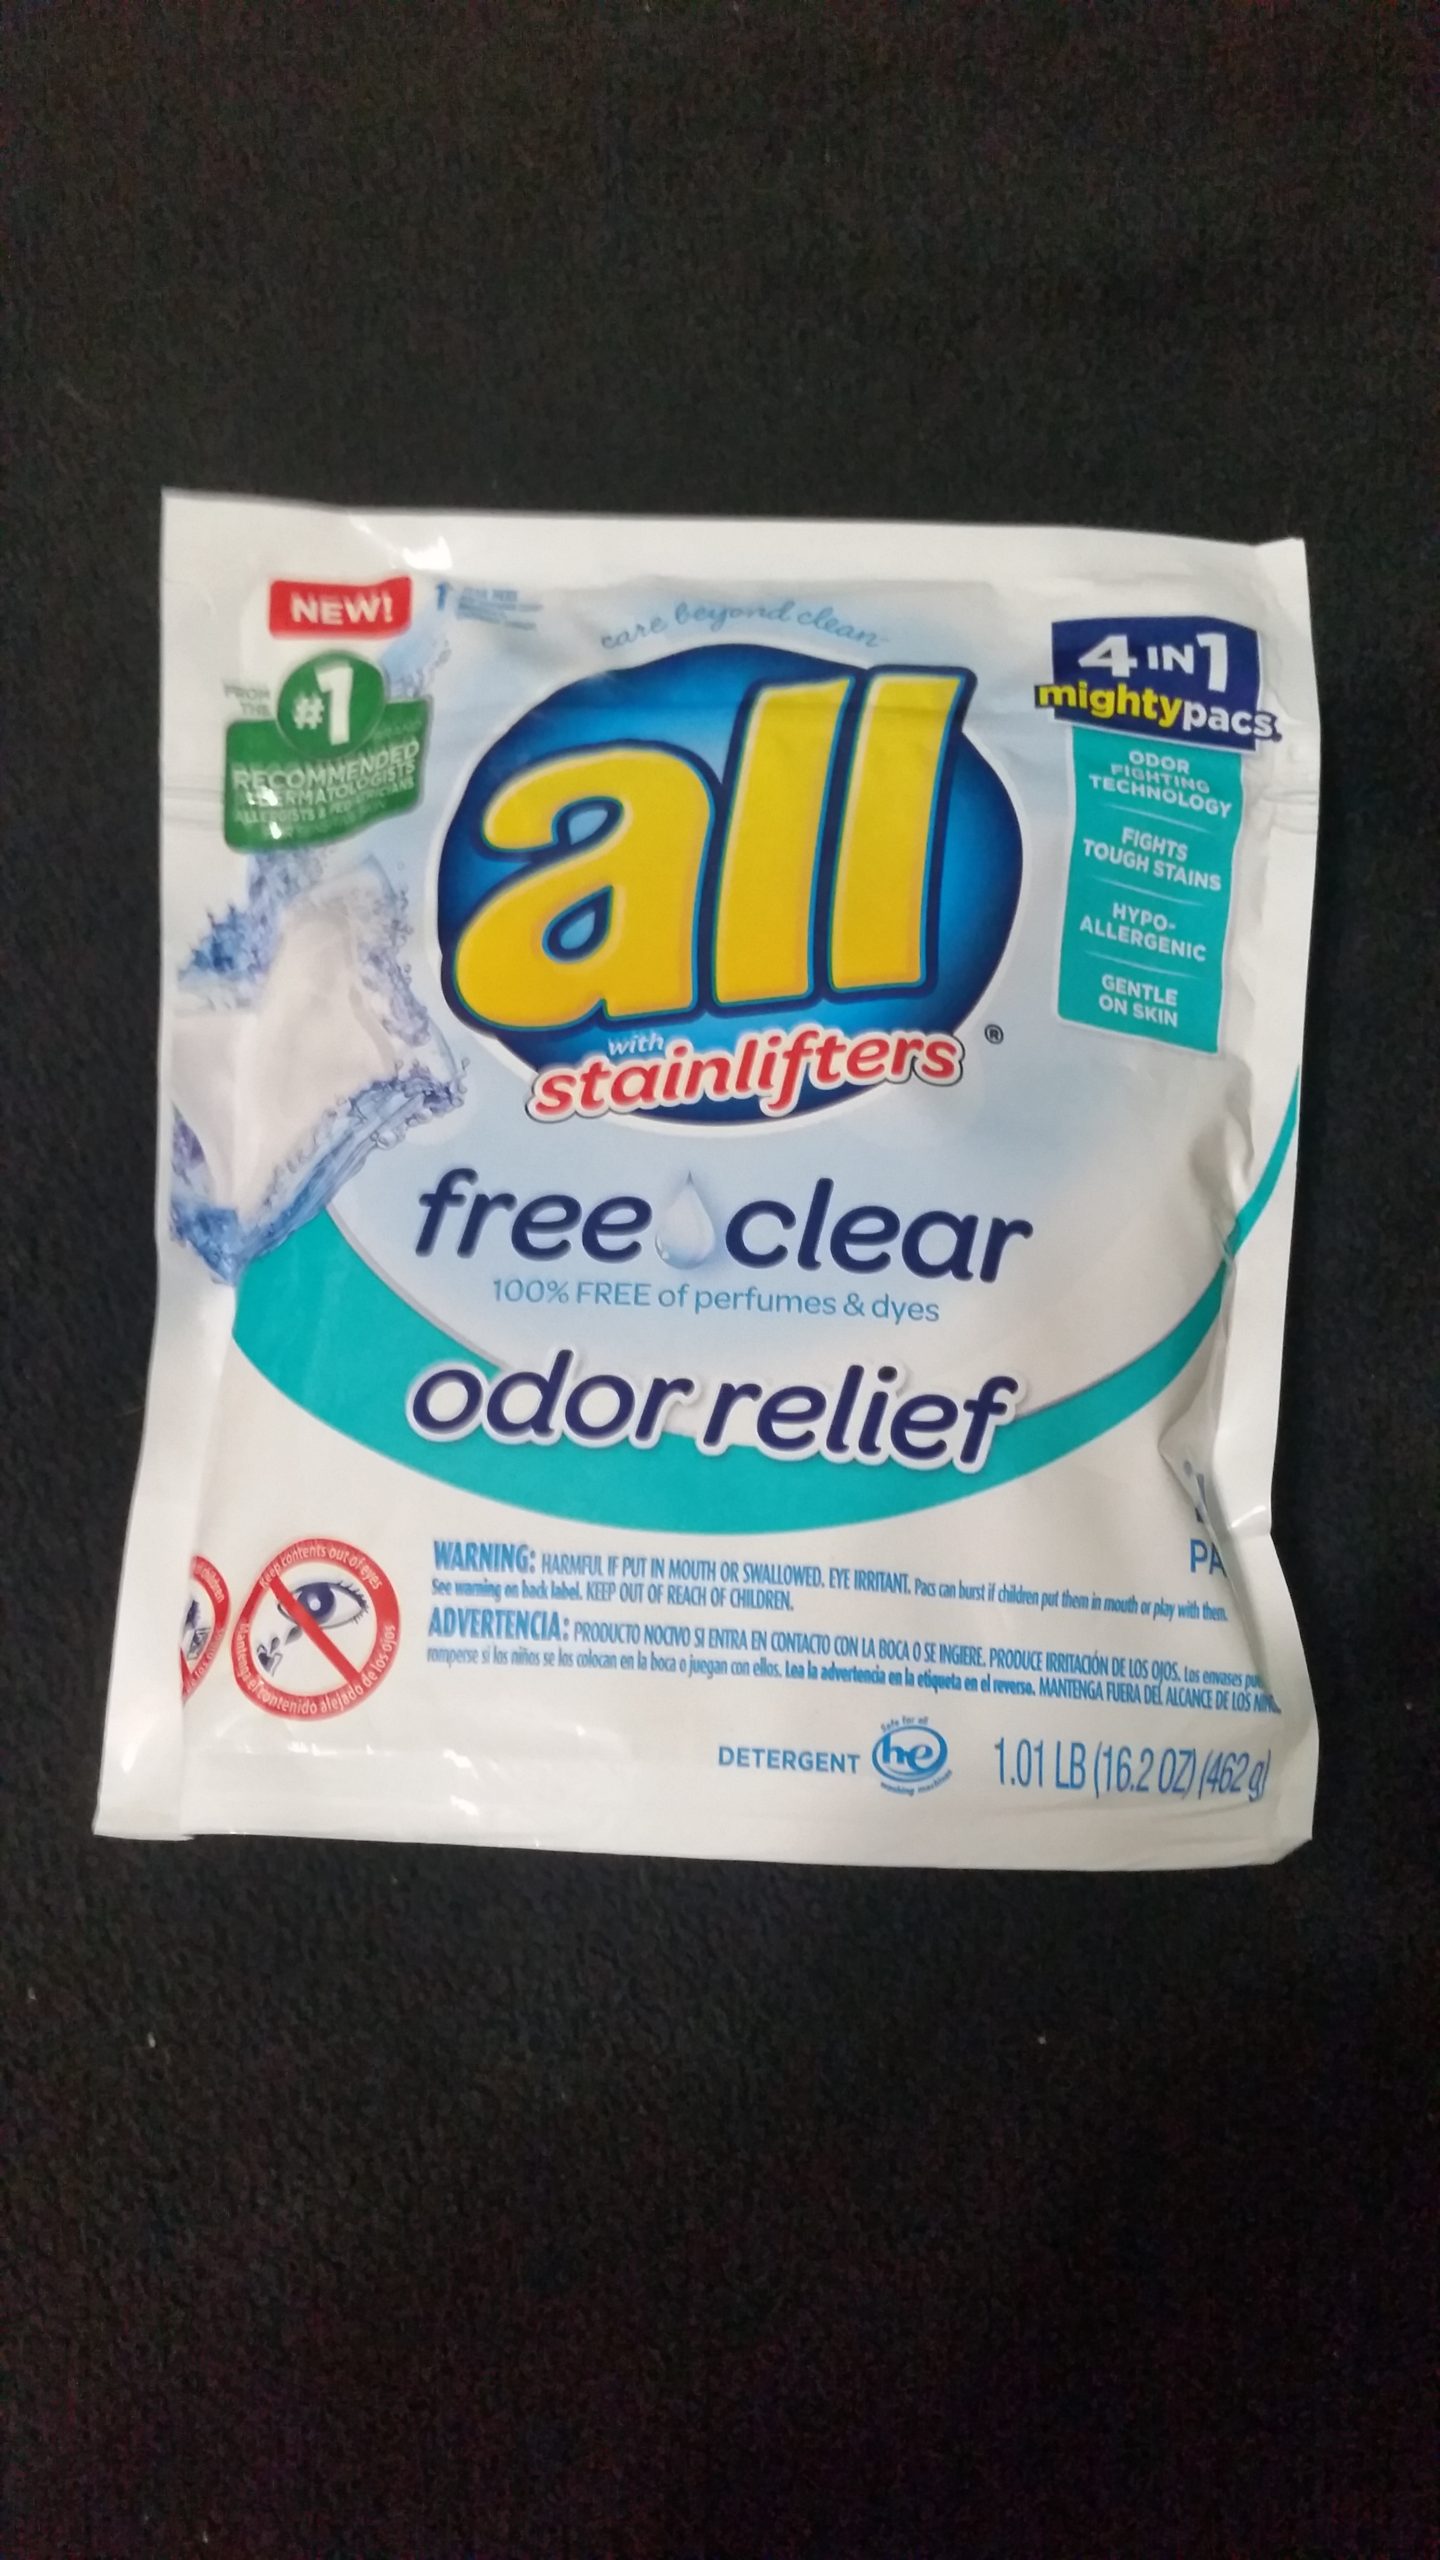 All Mighty Free Clear Stain lifers odor relief mighty pacs bag